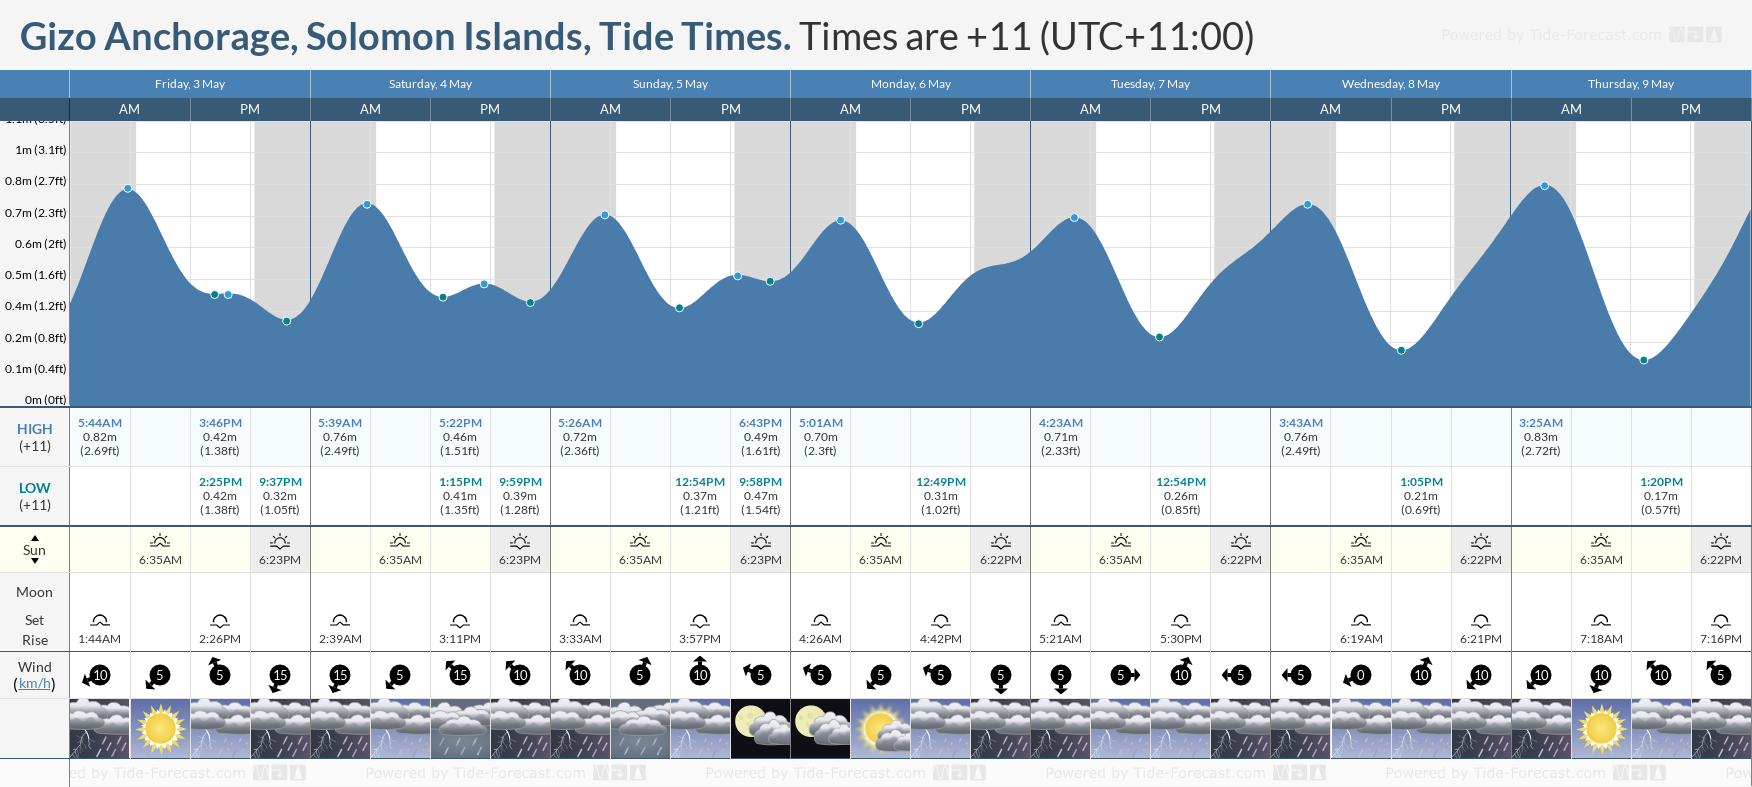 Gizo Anchorage, Solomon Islands Tide Chart including high and low tide tide times for the next 7 days